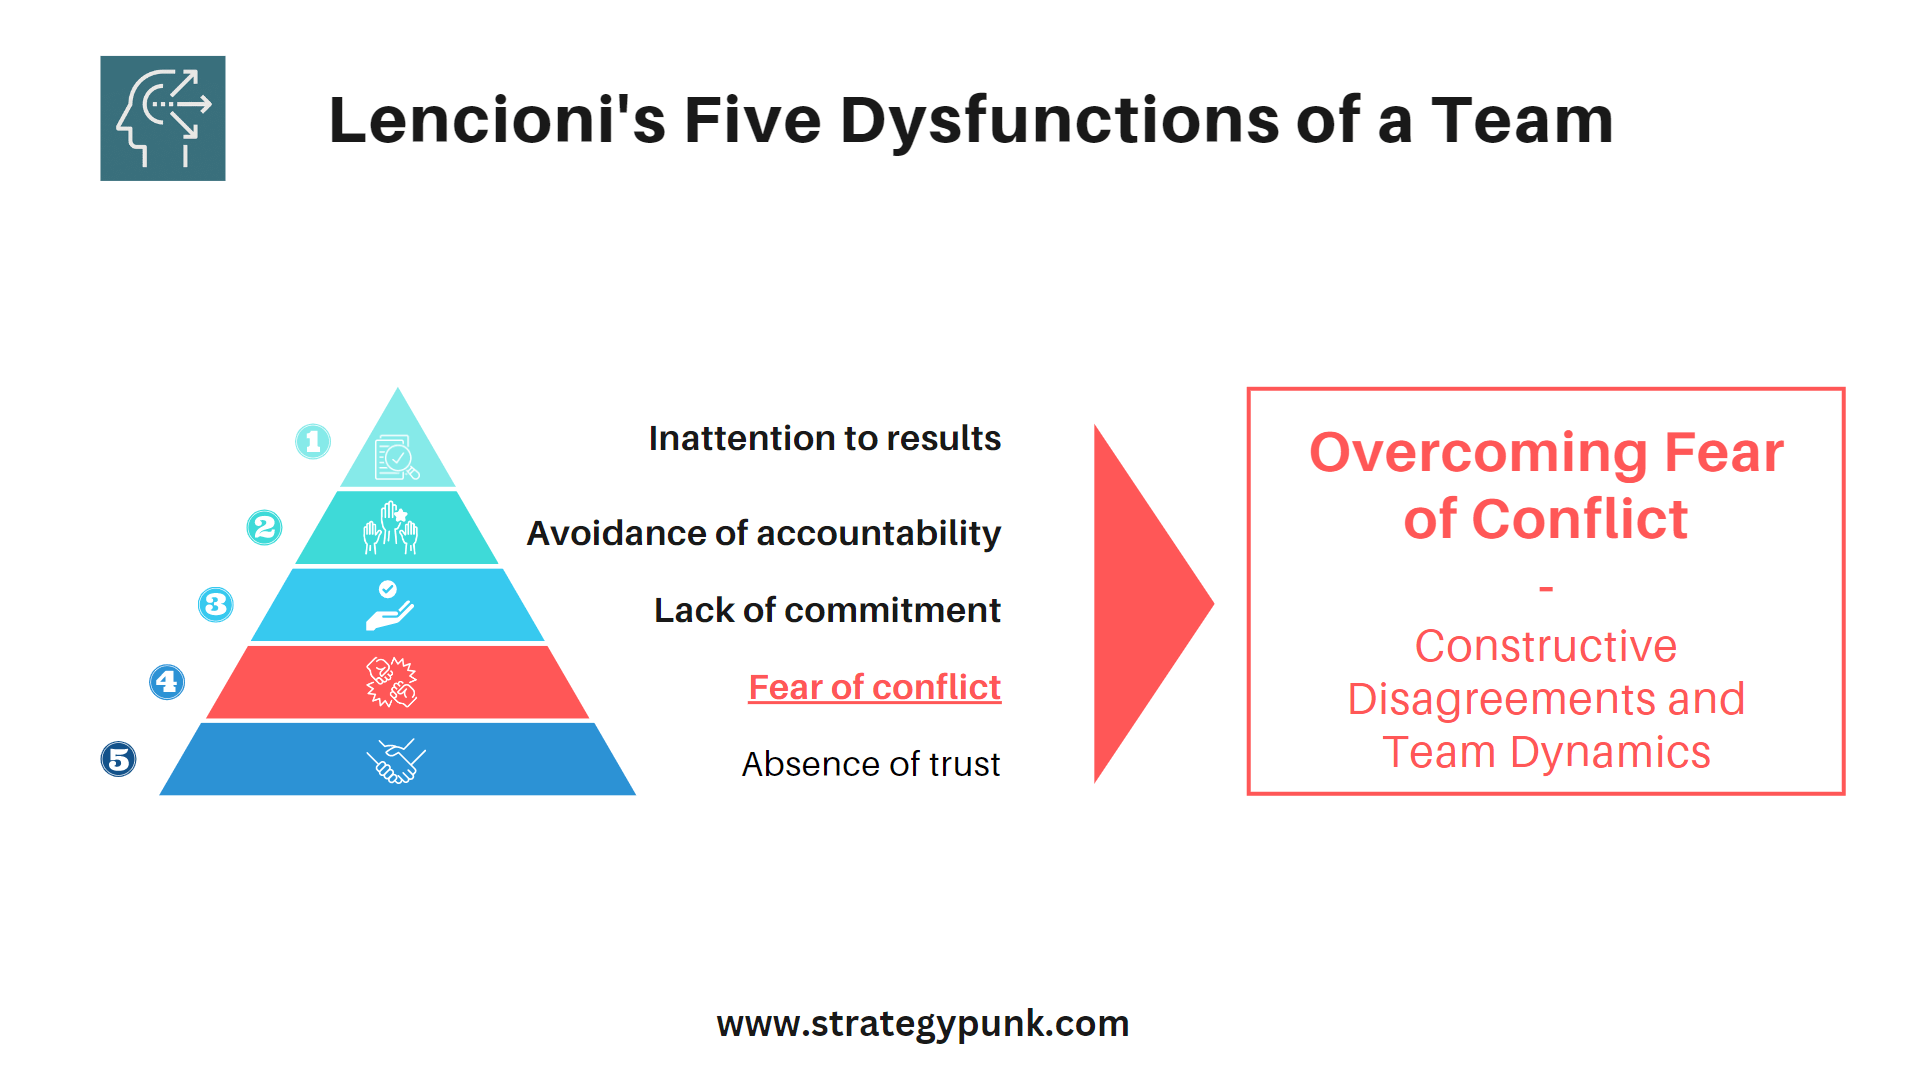 Overcoming Fear of Conflict: Constructive Disagreements and Team Dynamics